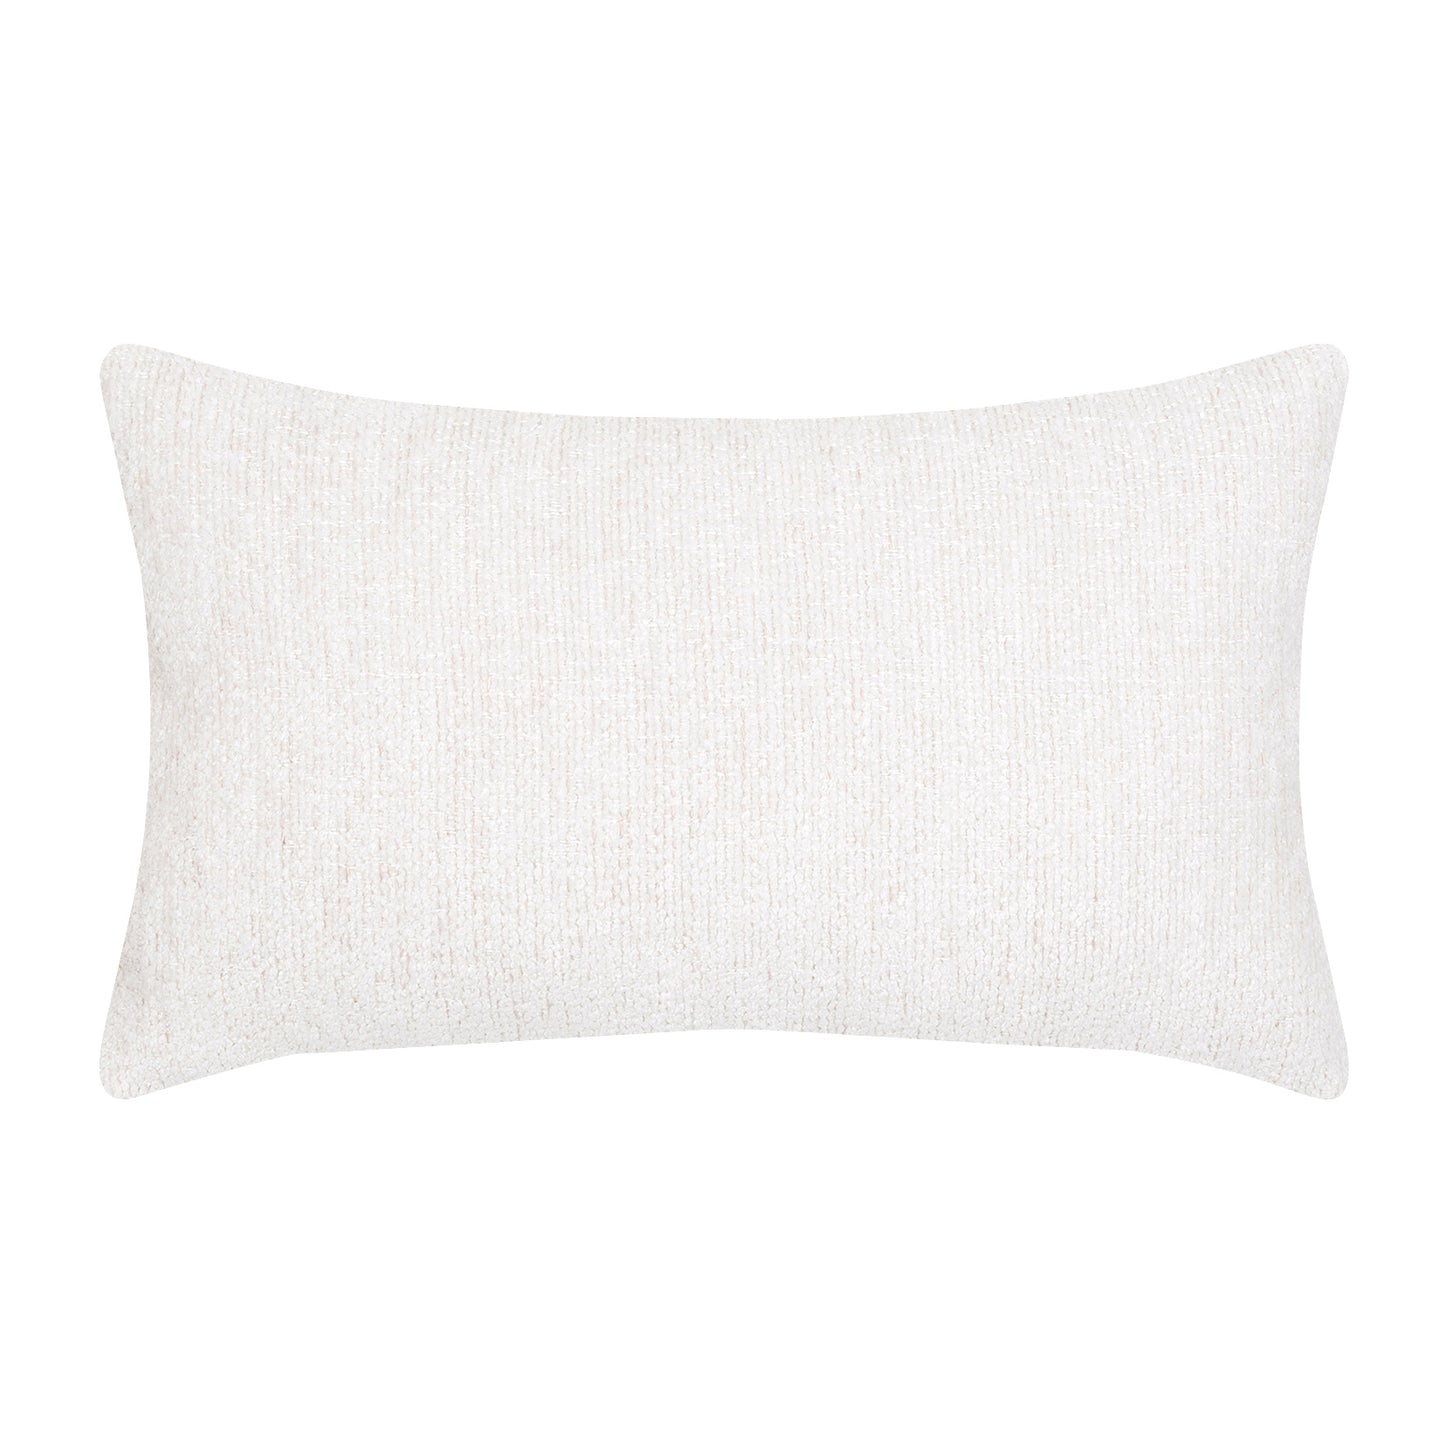 12" x 20" Elaine Smith Pillow  Comfort Oyster